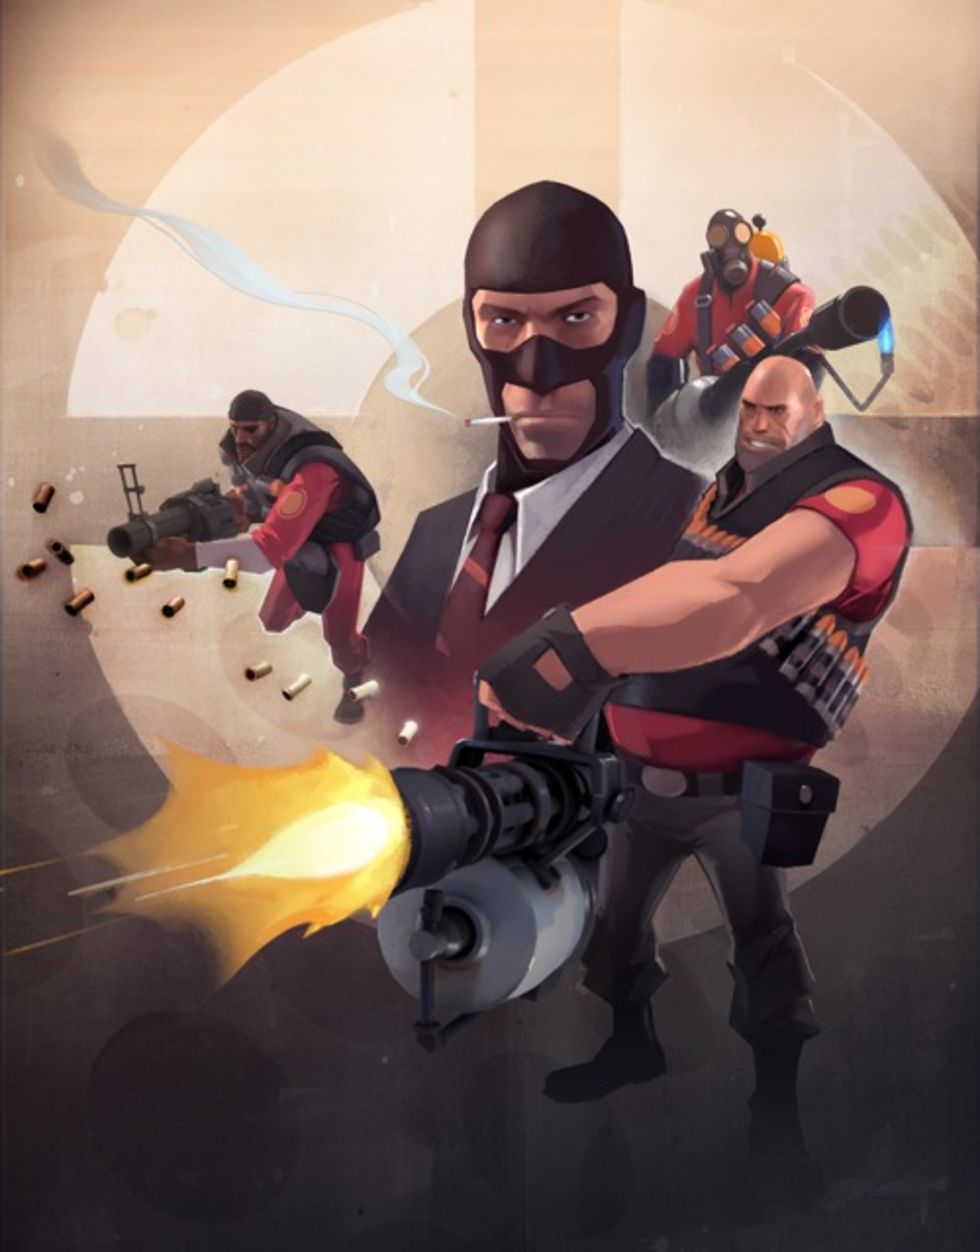 team fortress 2 xbox 360 heads up display